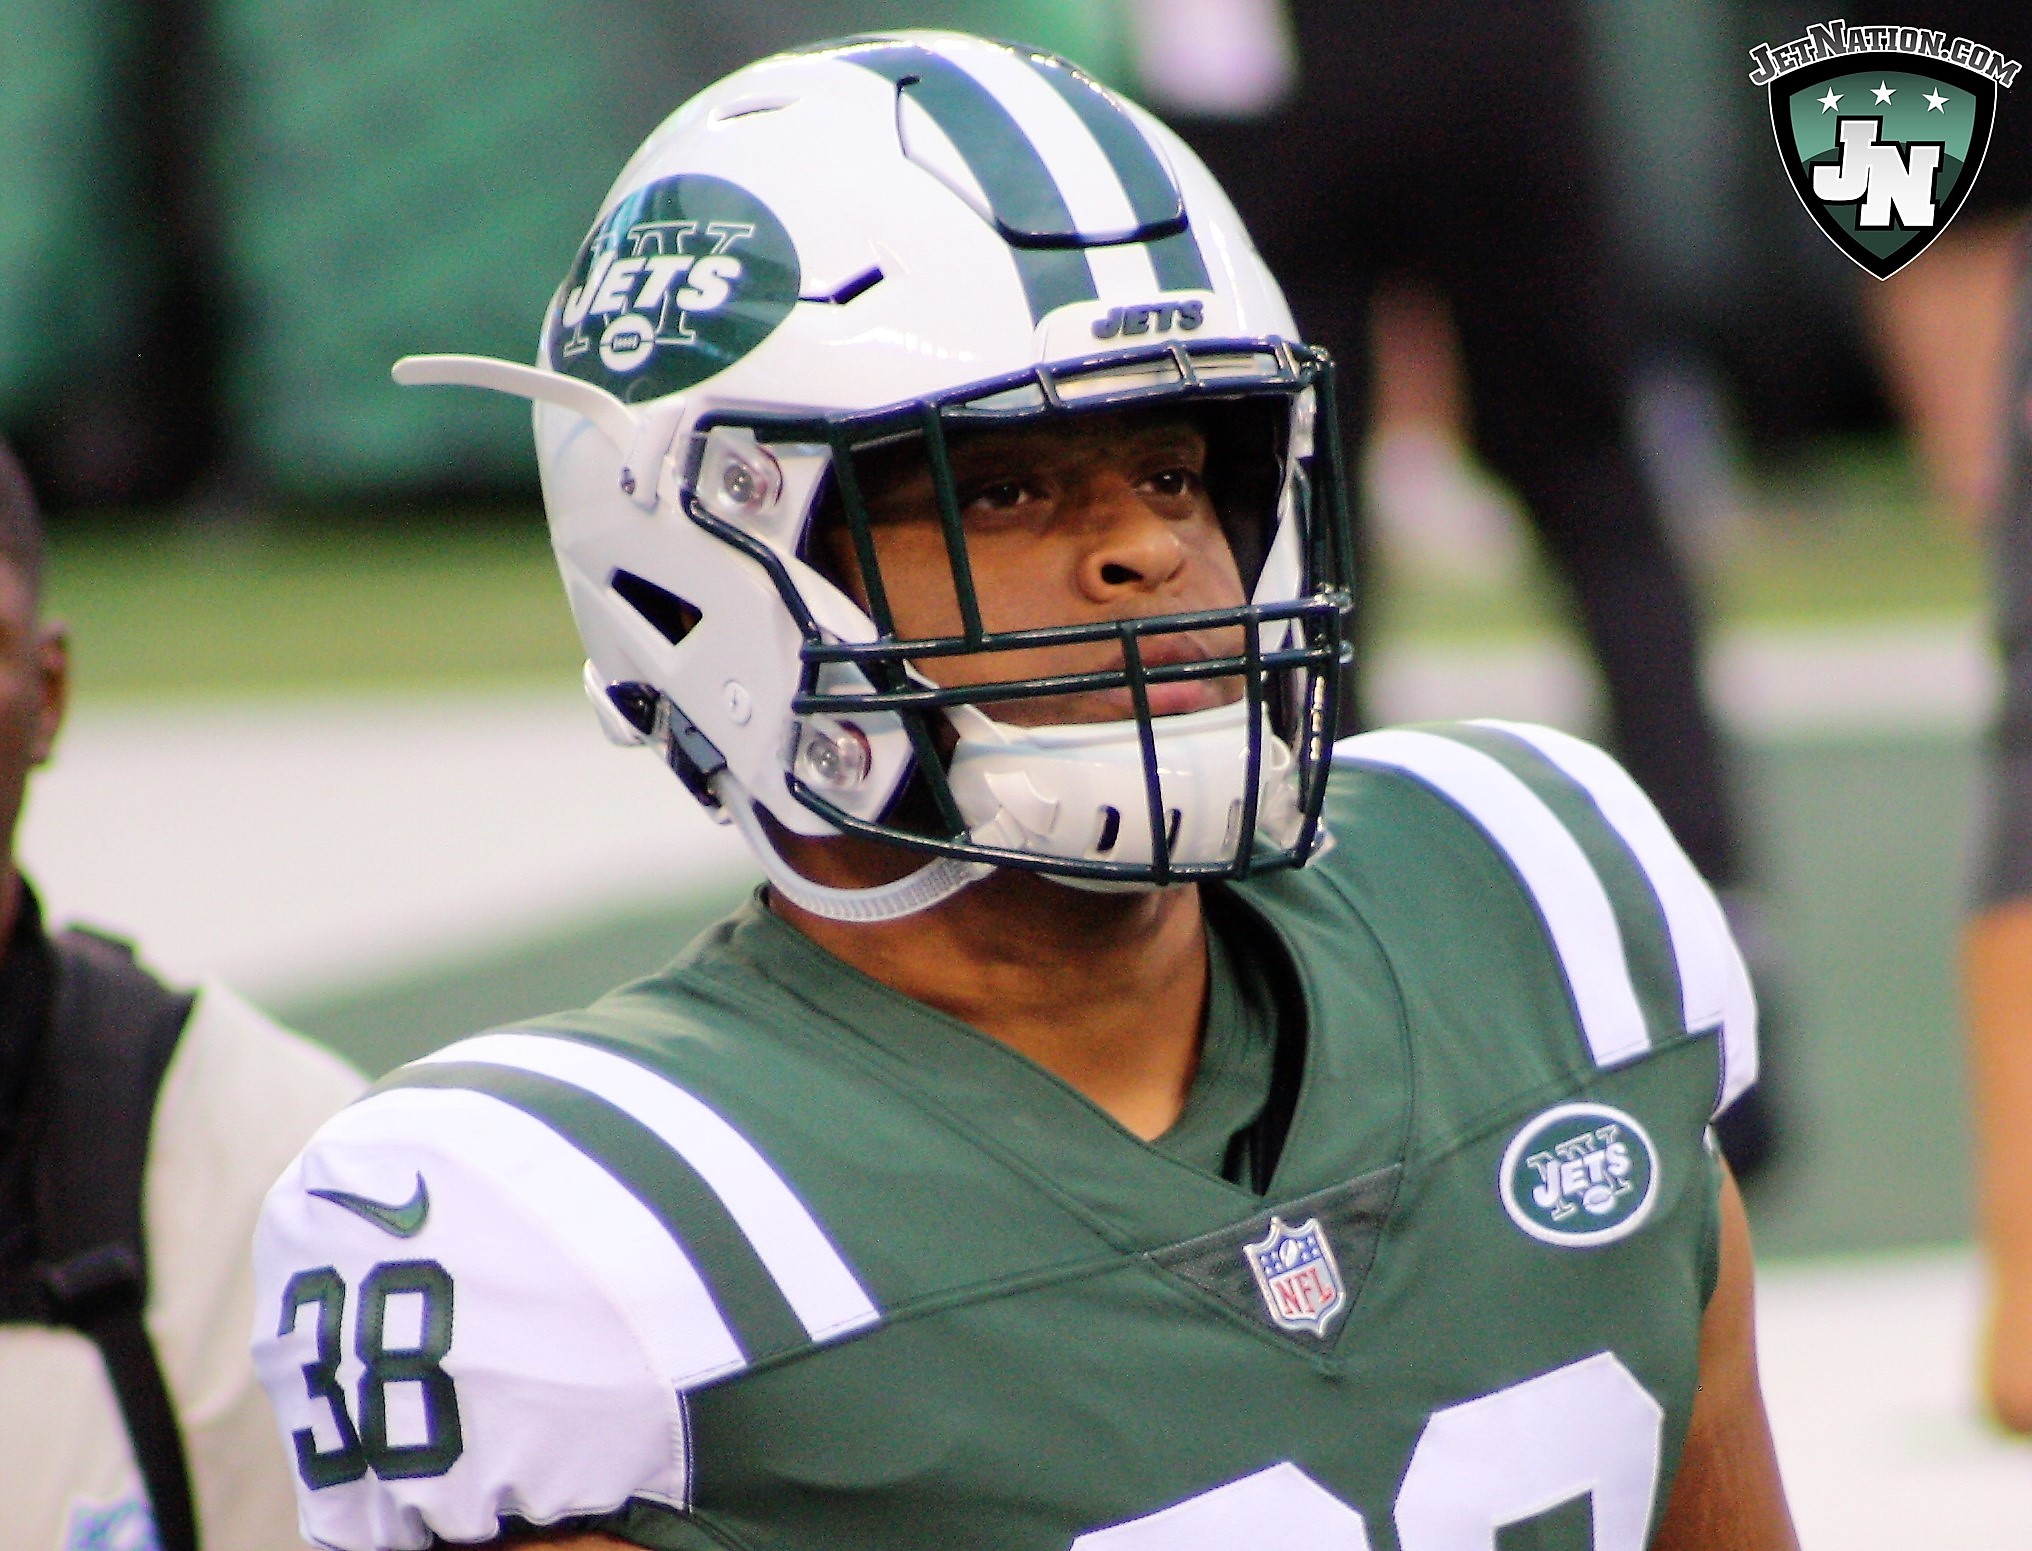 Jets Confirm 18 Players Let go: Here's the List